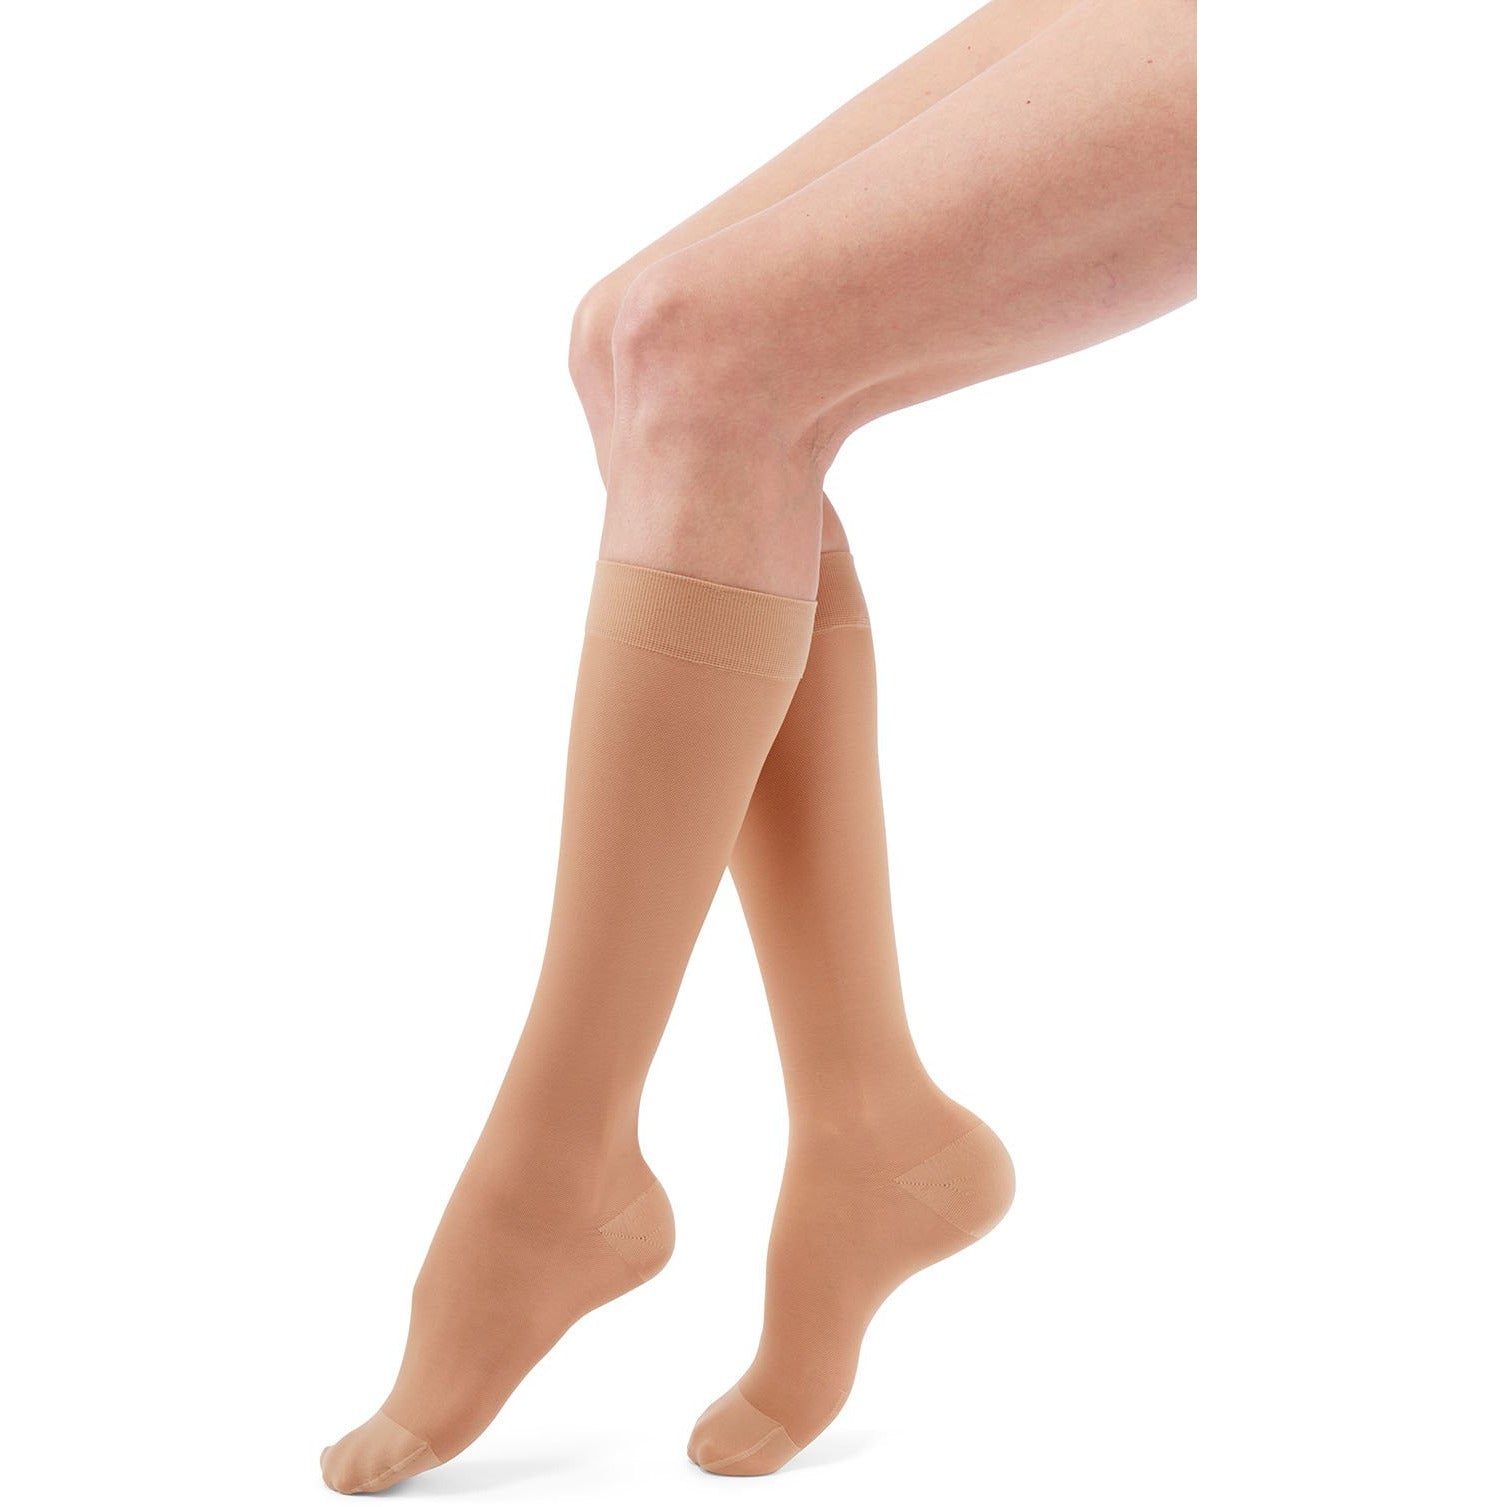 Duomed Transparent Women's 20-30 mmHg Knee High, Nude